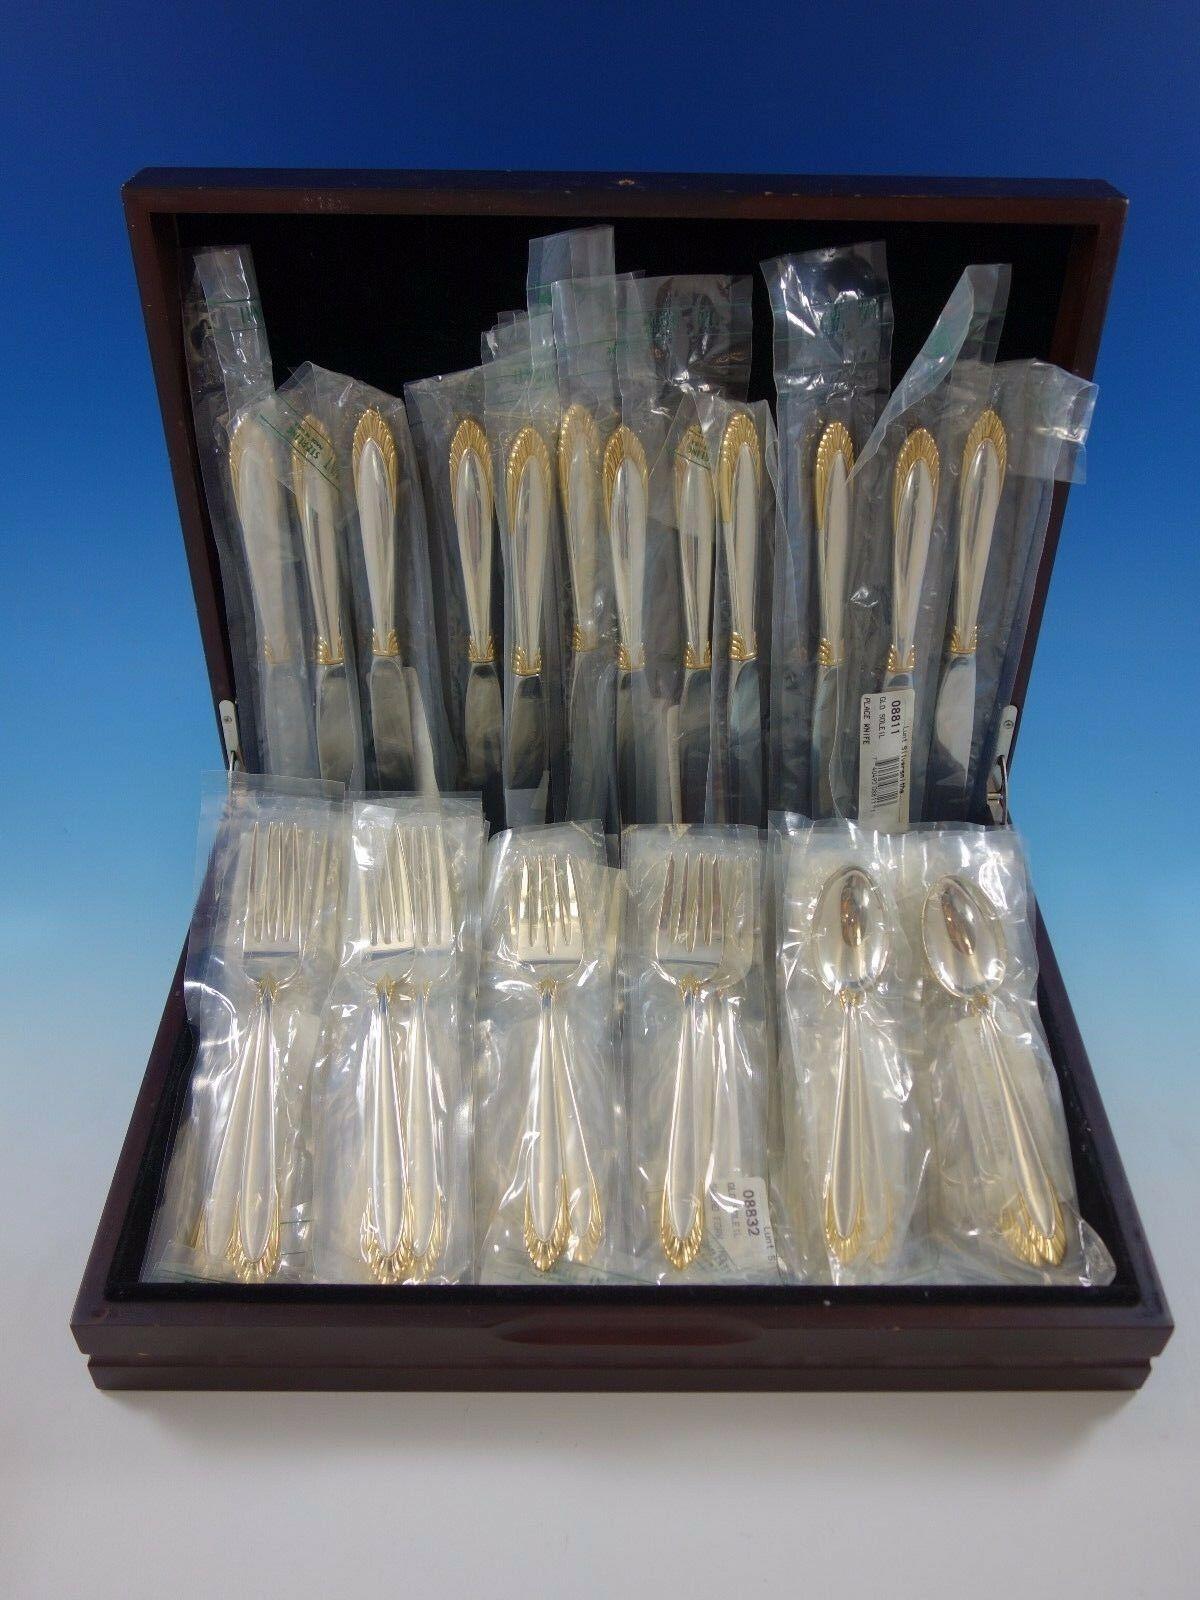 New Soleil gold accent by Lunt, circa 1995, sterling silver flatware set, 48 pieces. This set includes:

12 knives, 9 1/8